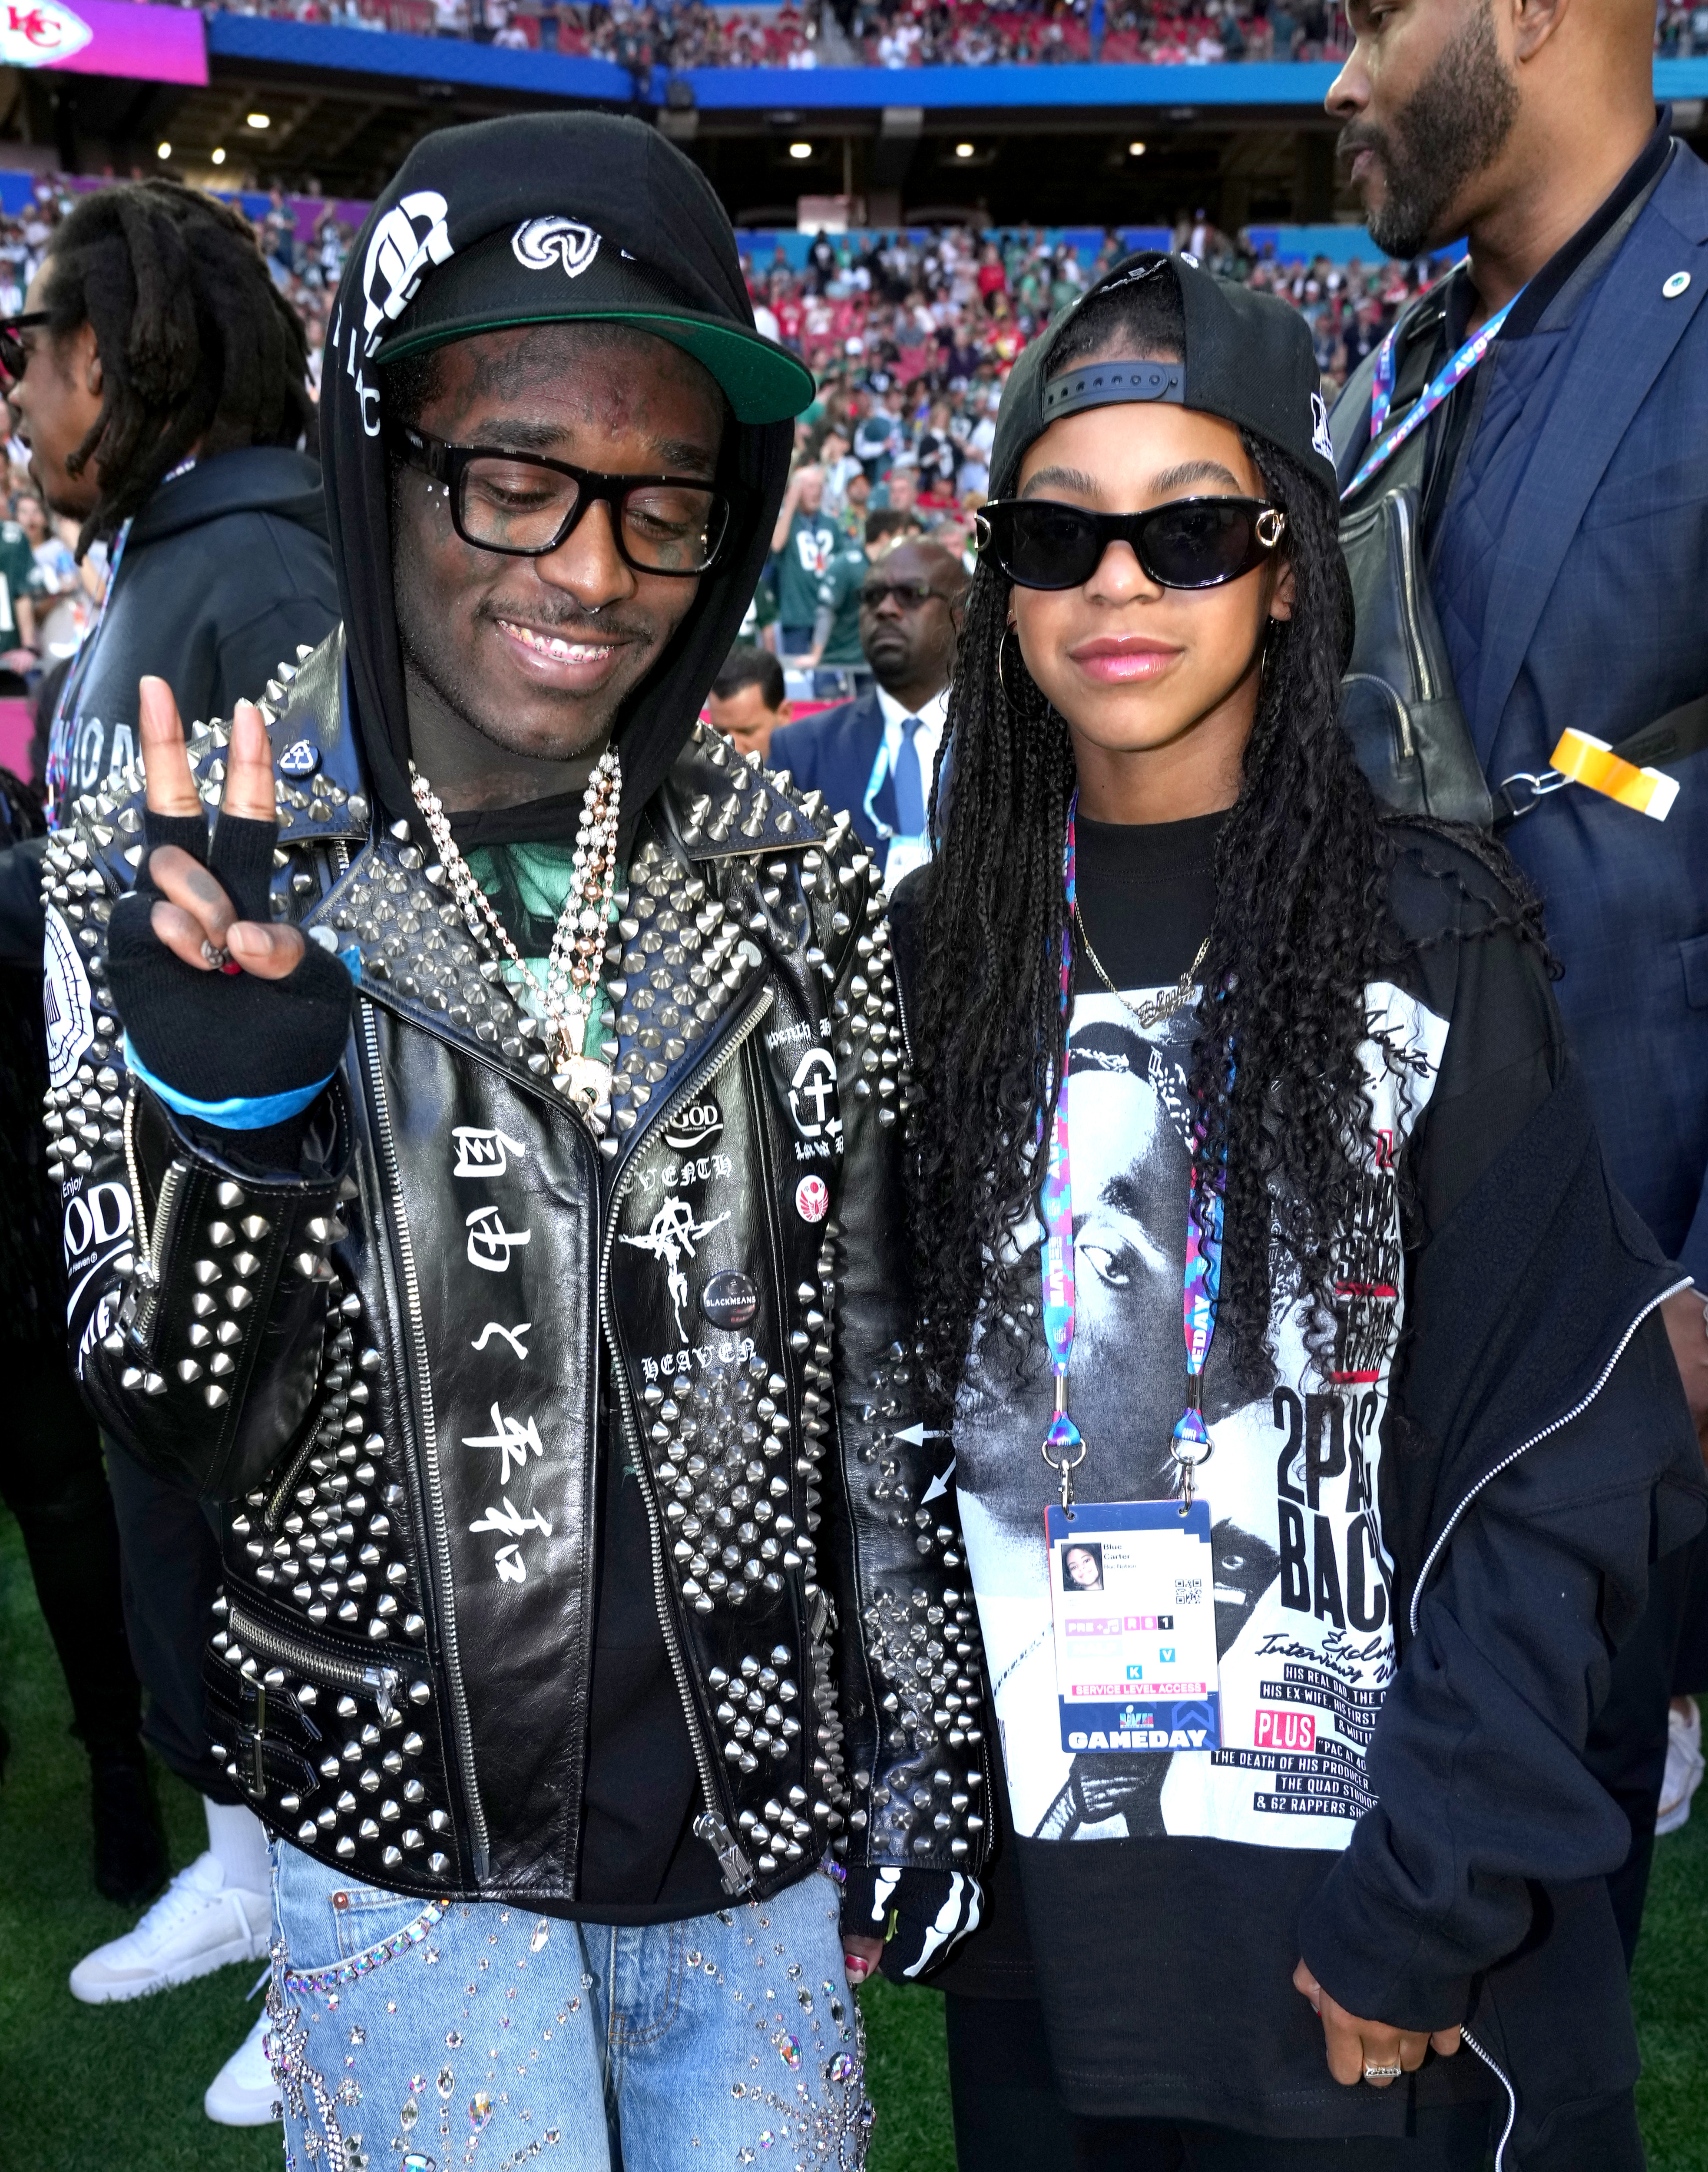 Lil Uzi Vert and Blue Ivy Carter attend Super Bowl LVII on February 12, 2023 in Glendale, Arizona | Source: Getty Images